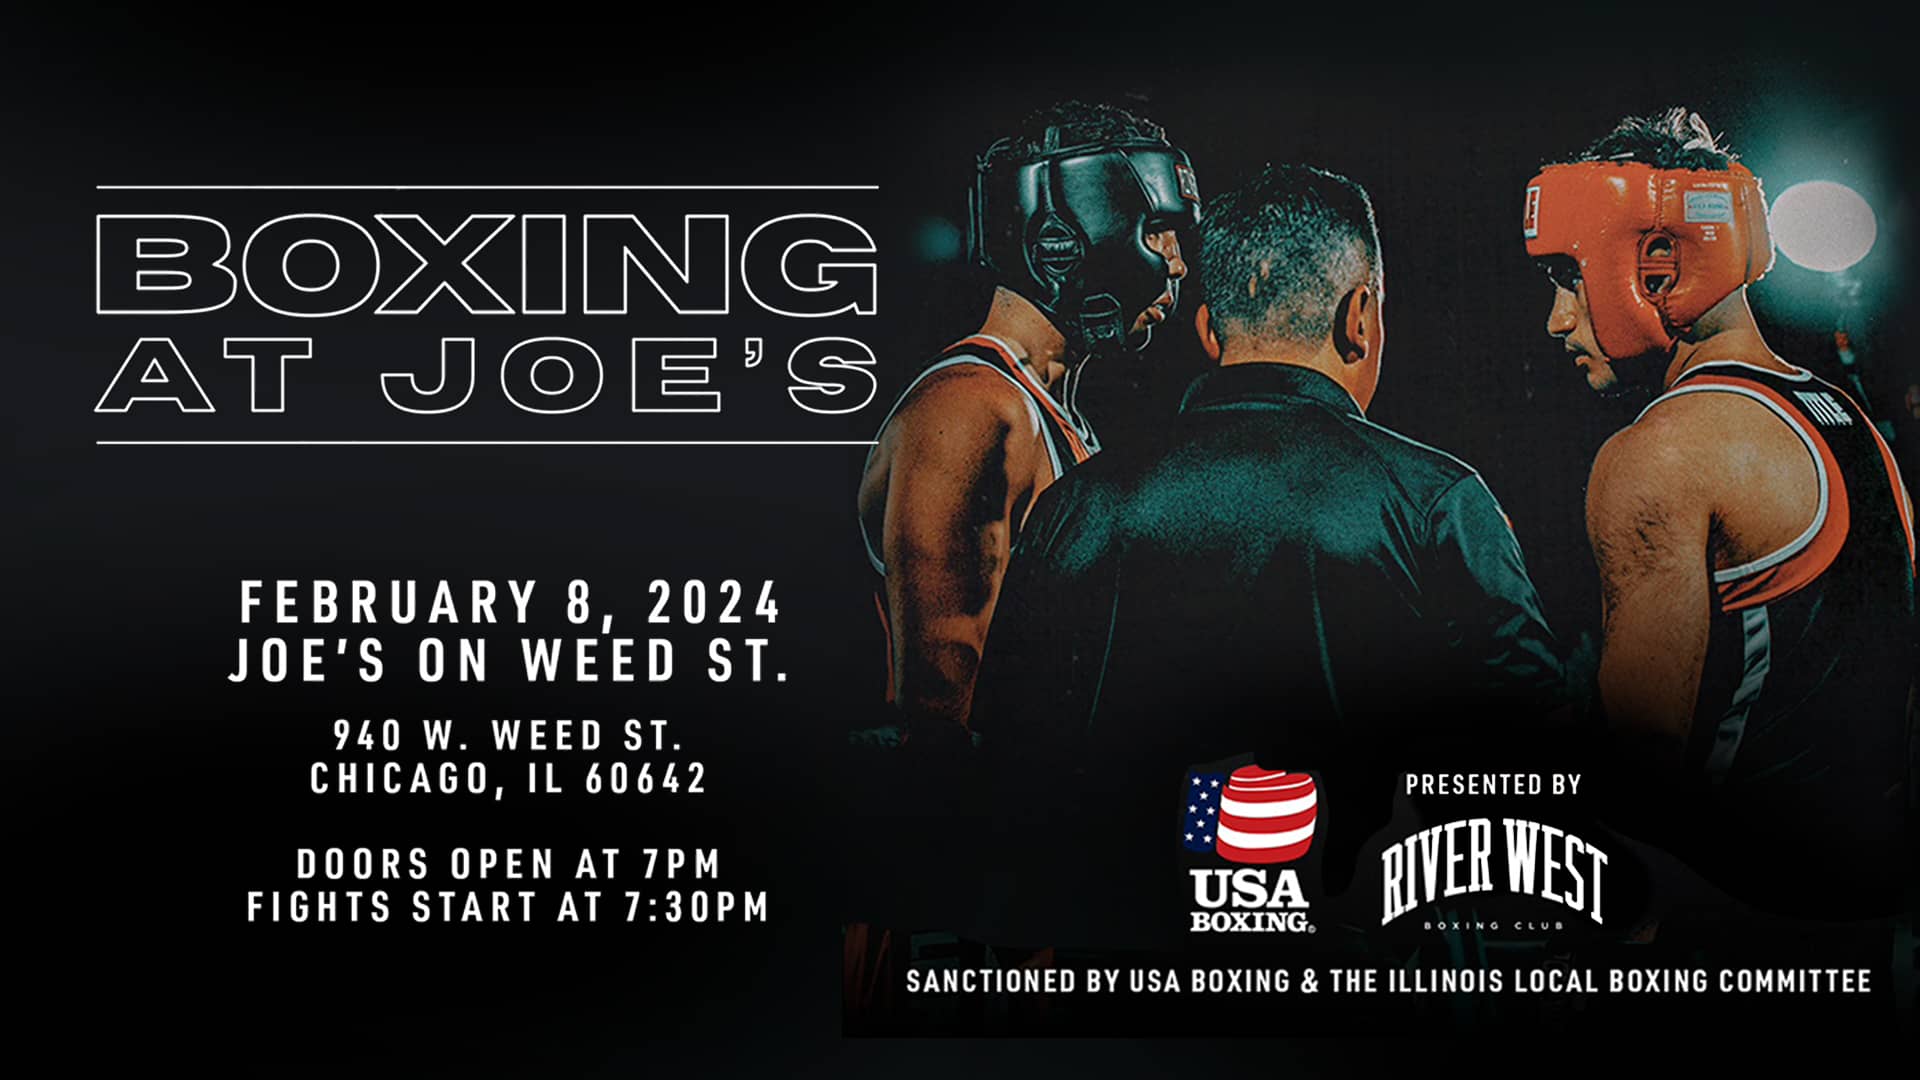 Poster for USA Boxing: Presented By River West Boxing Club on February 8, 2024 at Joe's on Weed St.